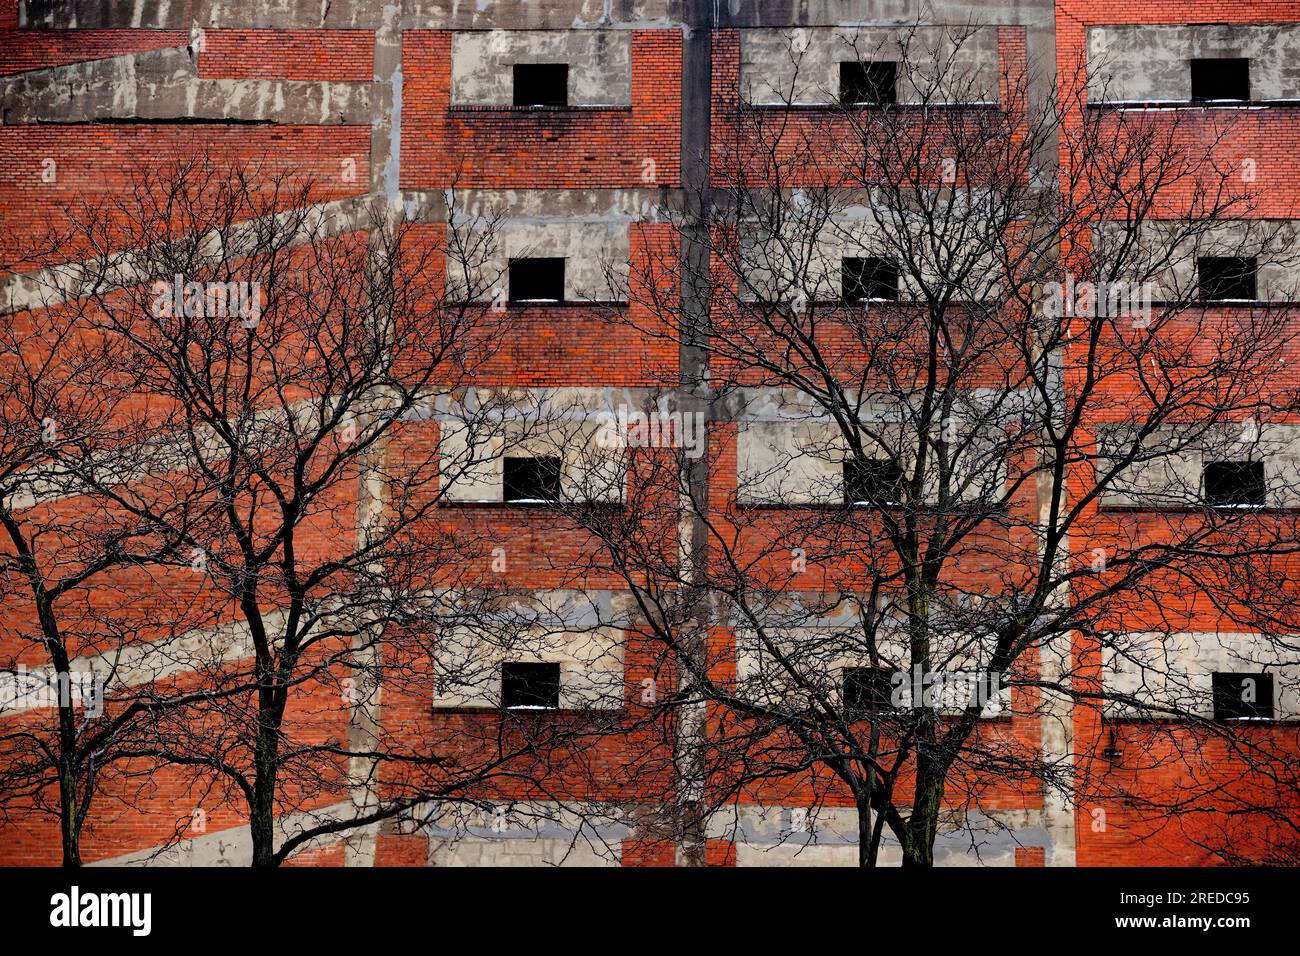 Contrasting image of leafless tree branches in front of  a multi level brick parking garage. Stock Photo